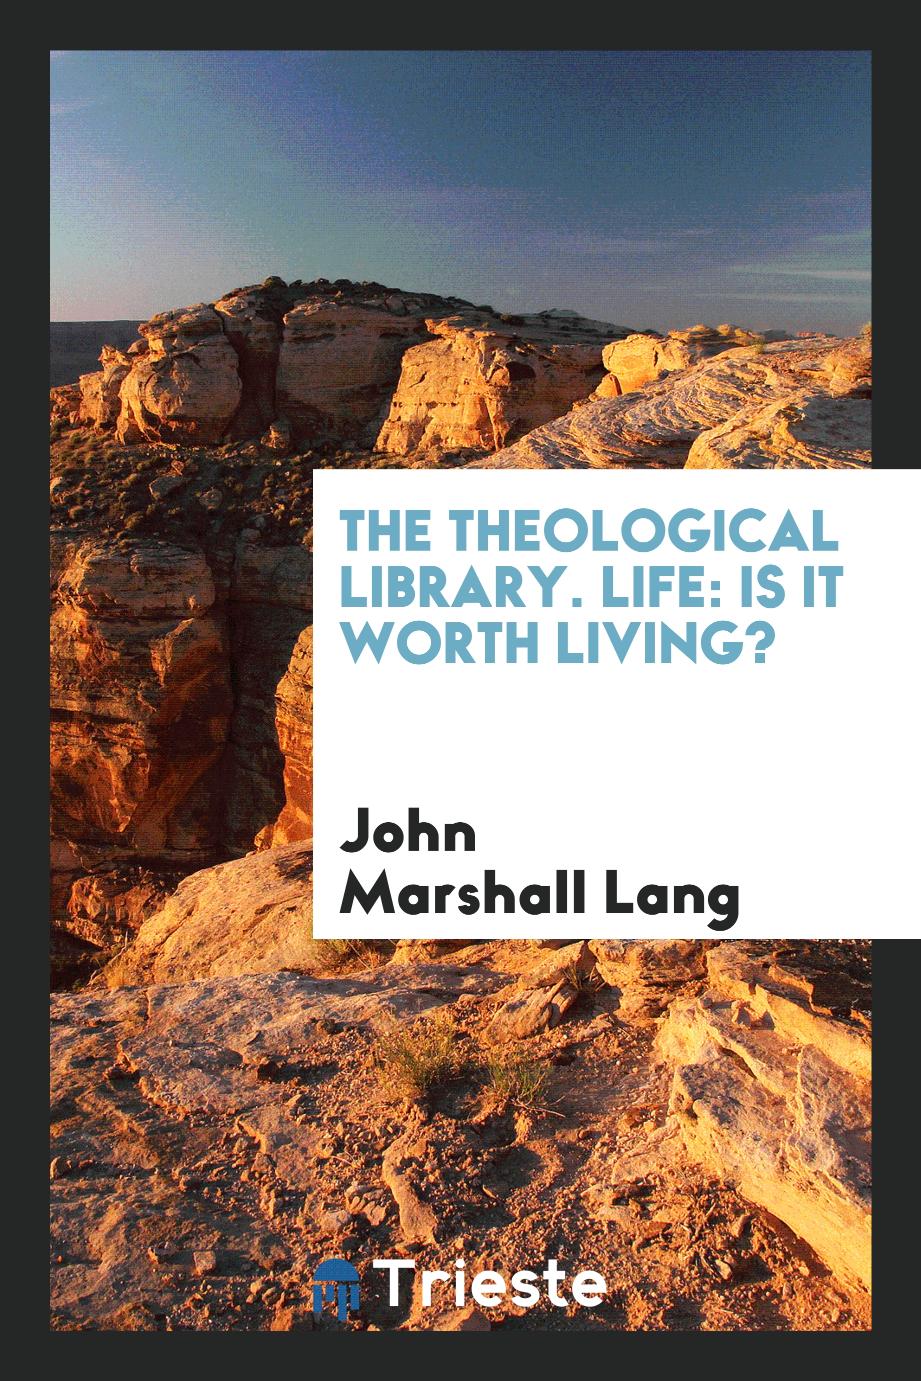 The theological Library. Life: is it worth living?